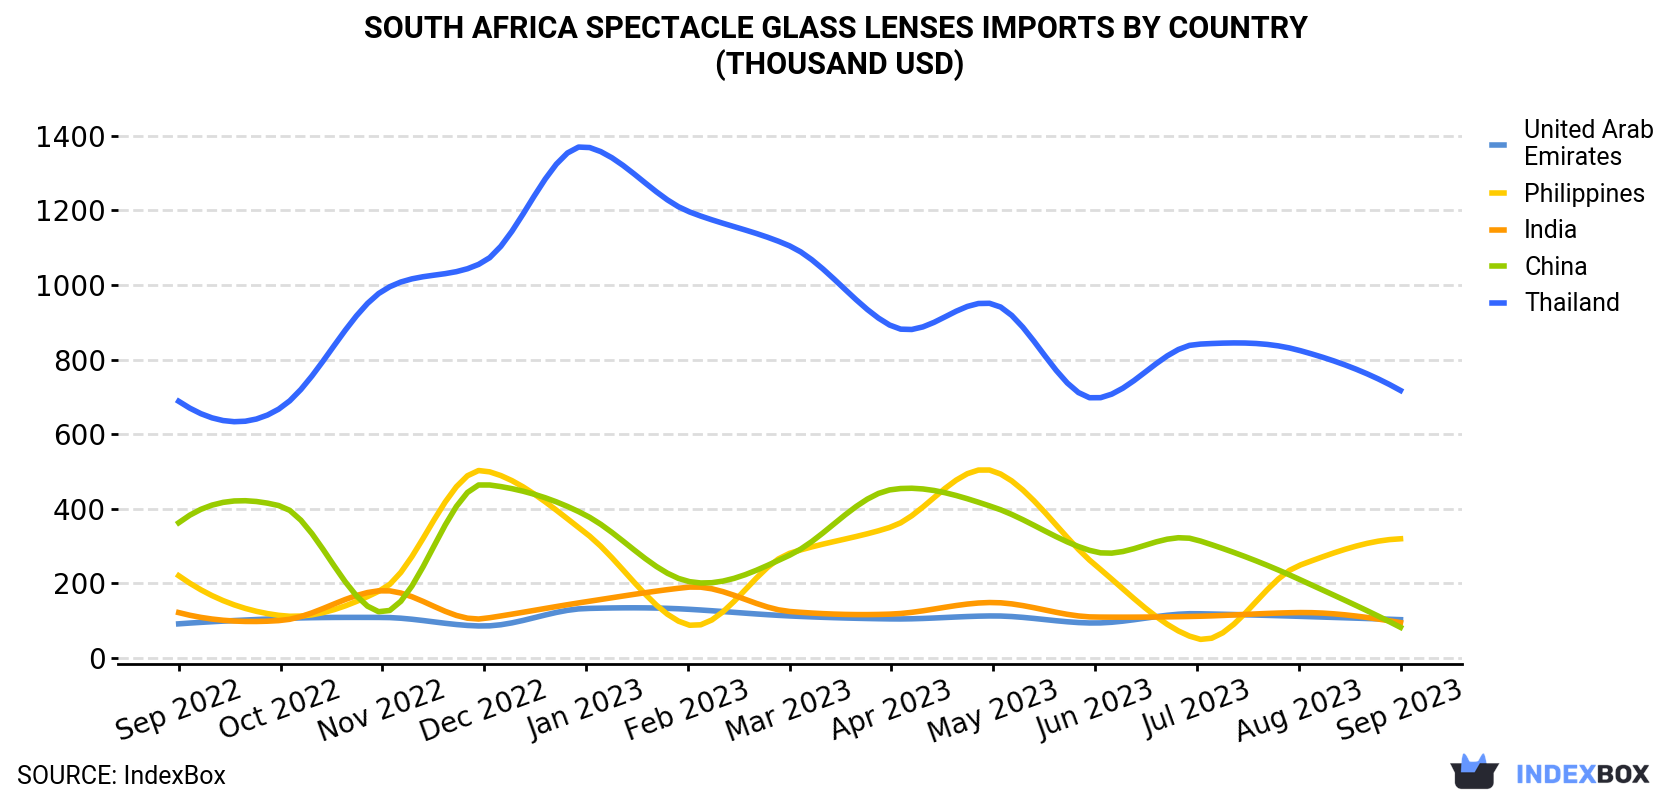 South Africa Spectacle Glass Lenses Imports By Country (Thousand USD)